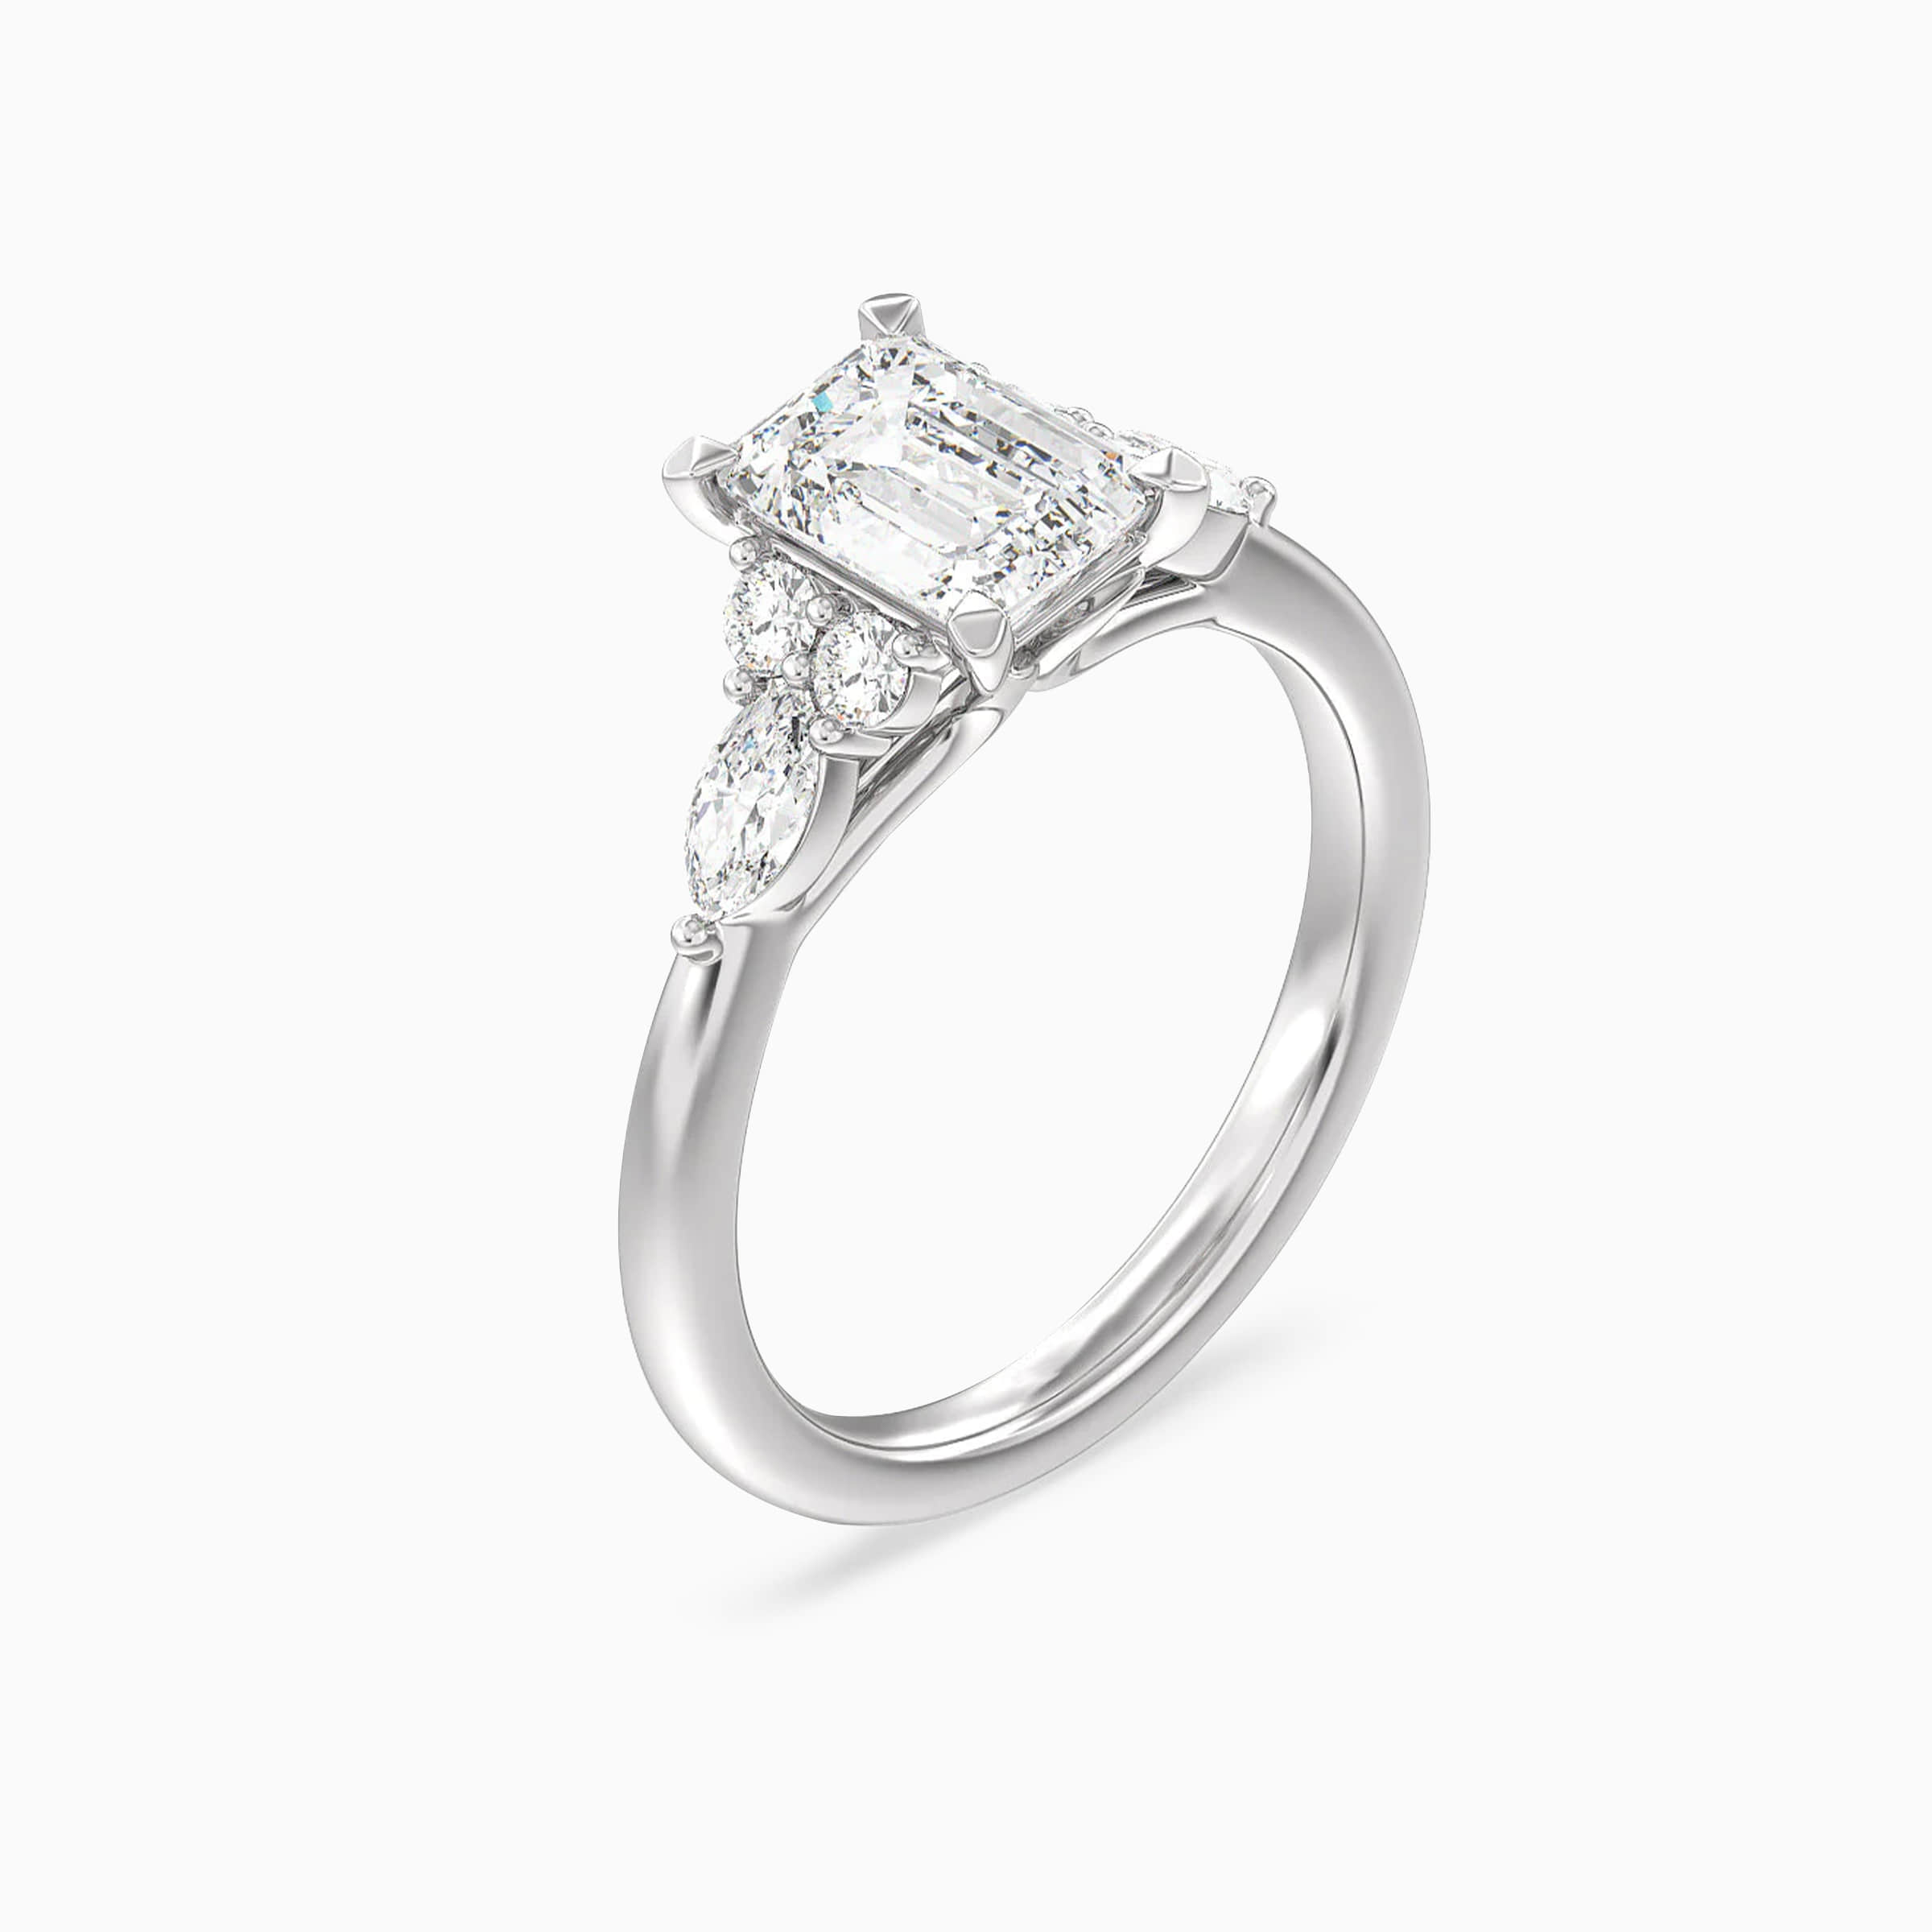 Darry Ring emerald cut engagement ring with side stones in platinum